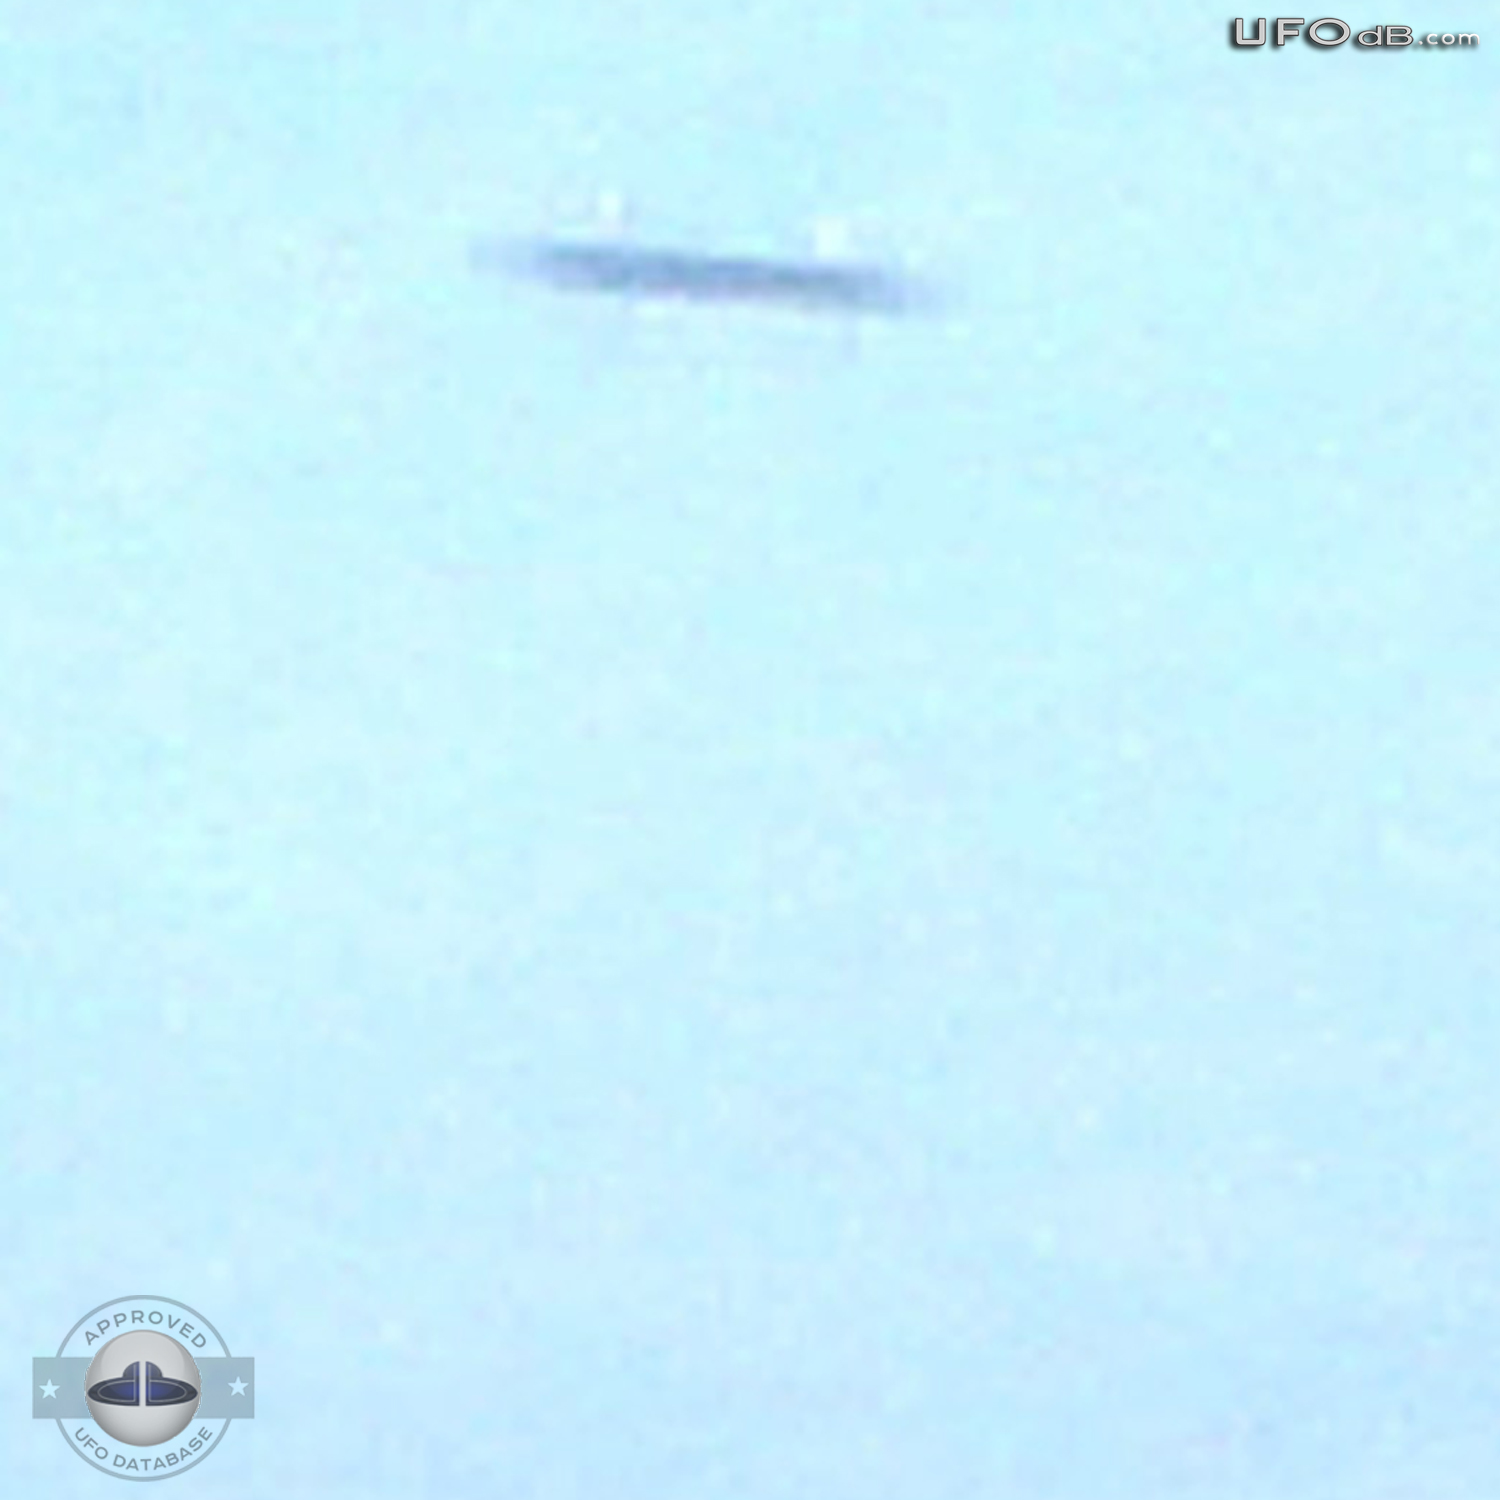 Colombia Saucer flying over the hills caught on picture | March 3 2003 UFO Picture #322-3